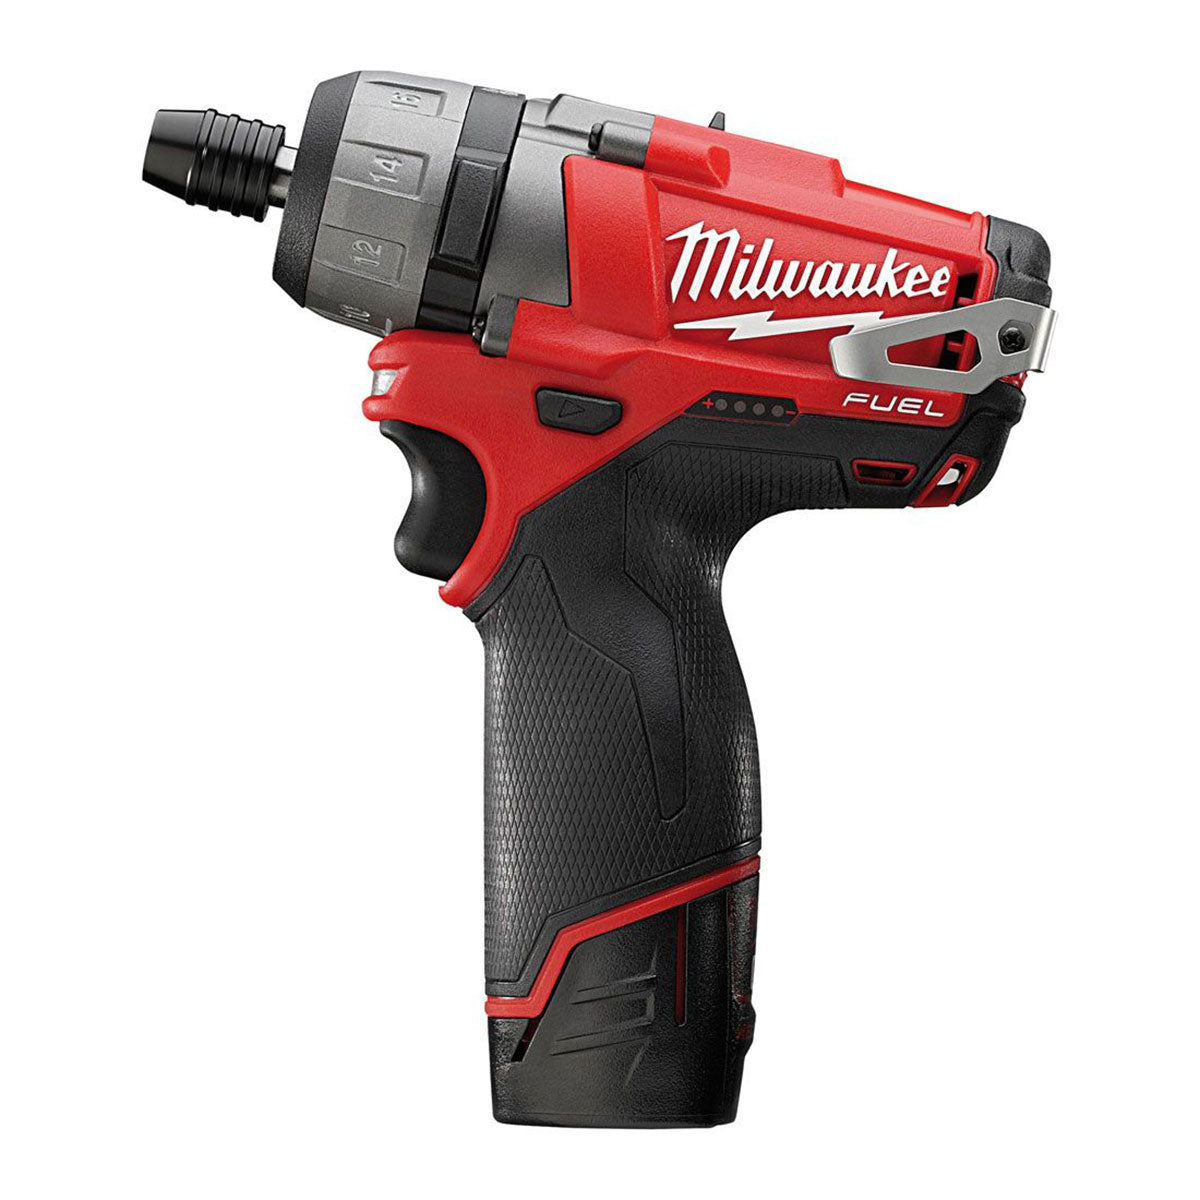 Milwaukee M12CD-202C 12V FUEL Brushless Sub Compact Driver With 2 x 2.0Ah Batteries Charger & Case 4933440568